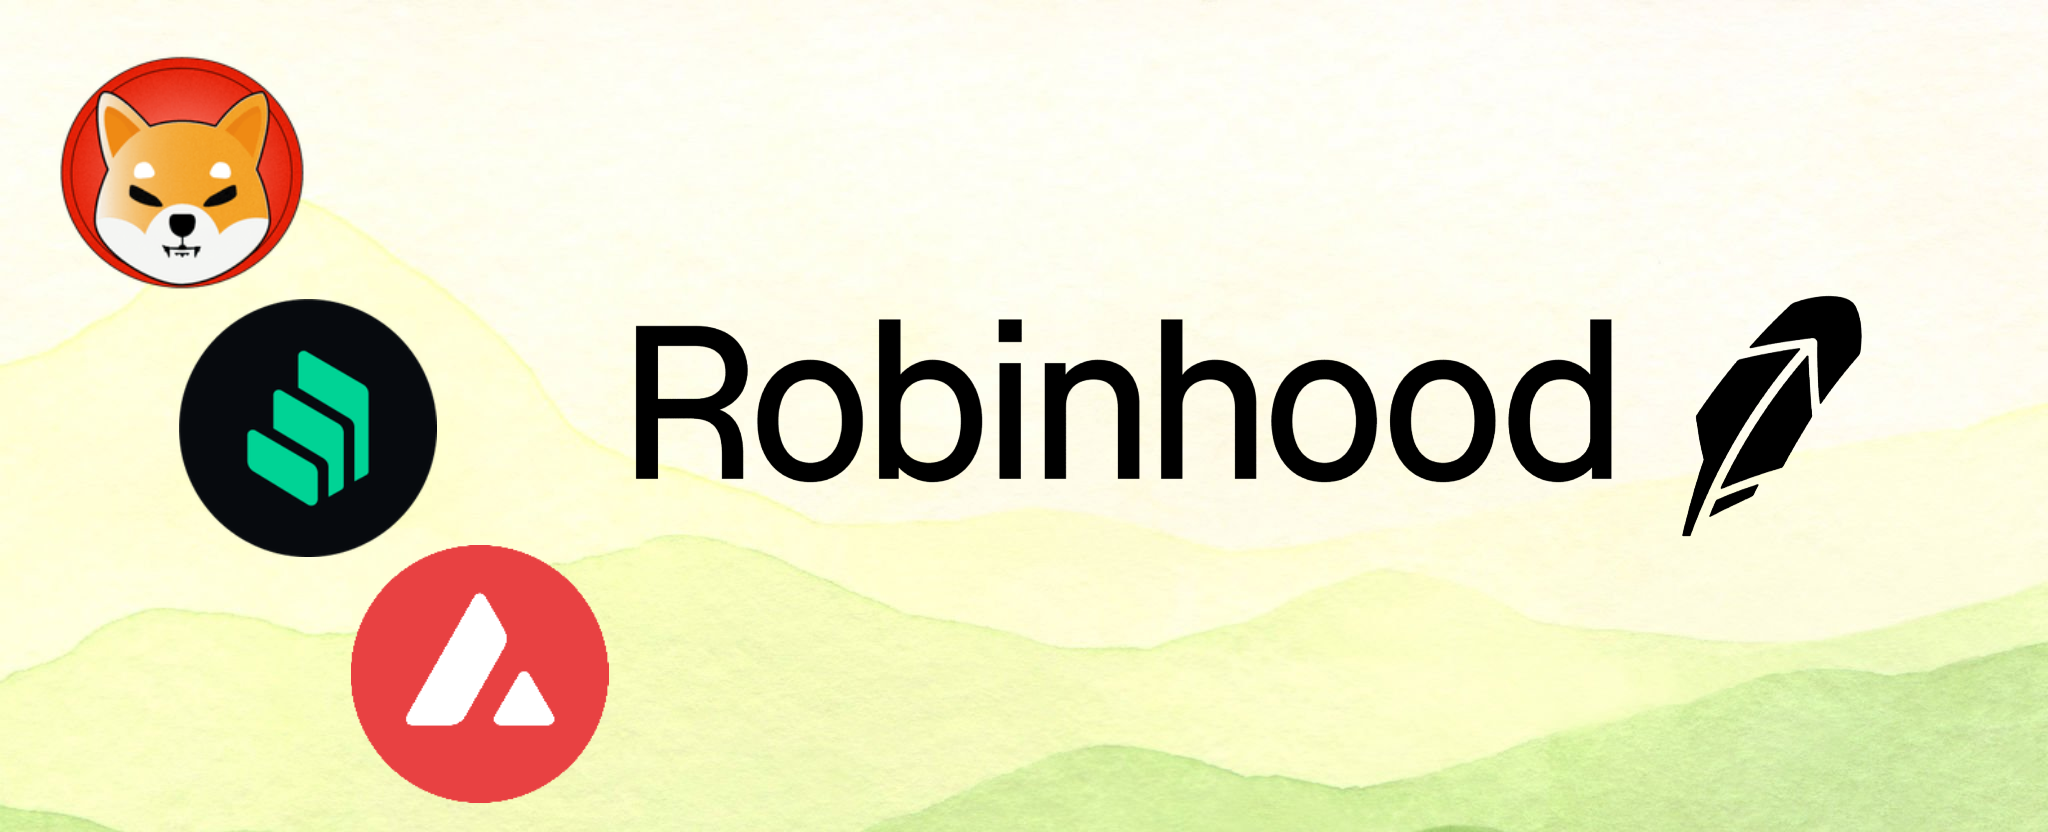 Robinhood expands crypto offerings for New Yorkers, adding meme token Shiba Inu along with Avalanche, Compound.